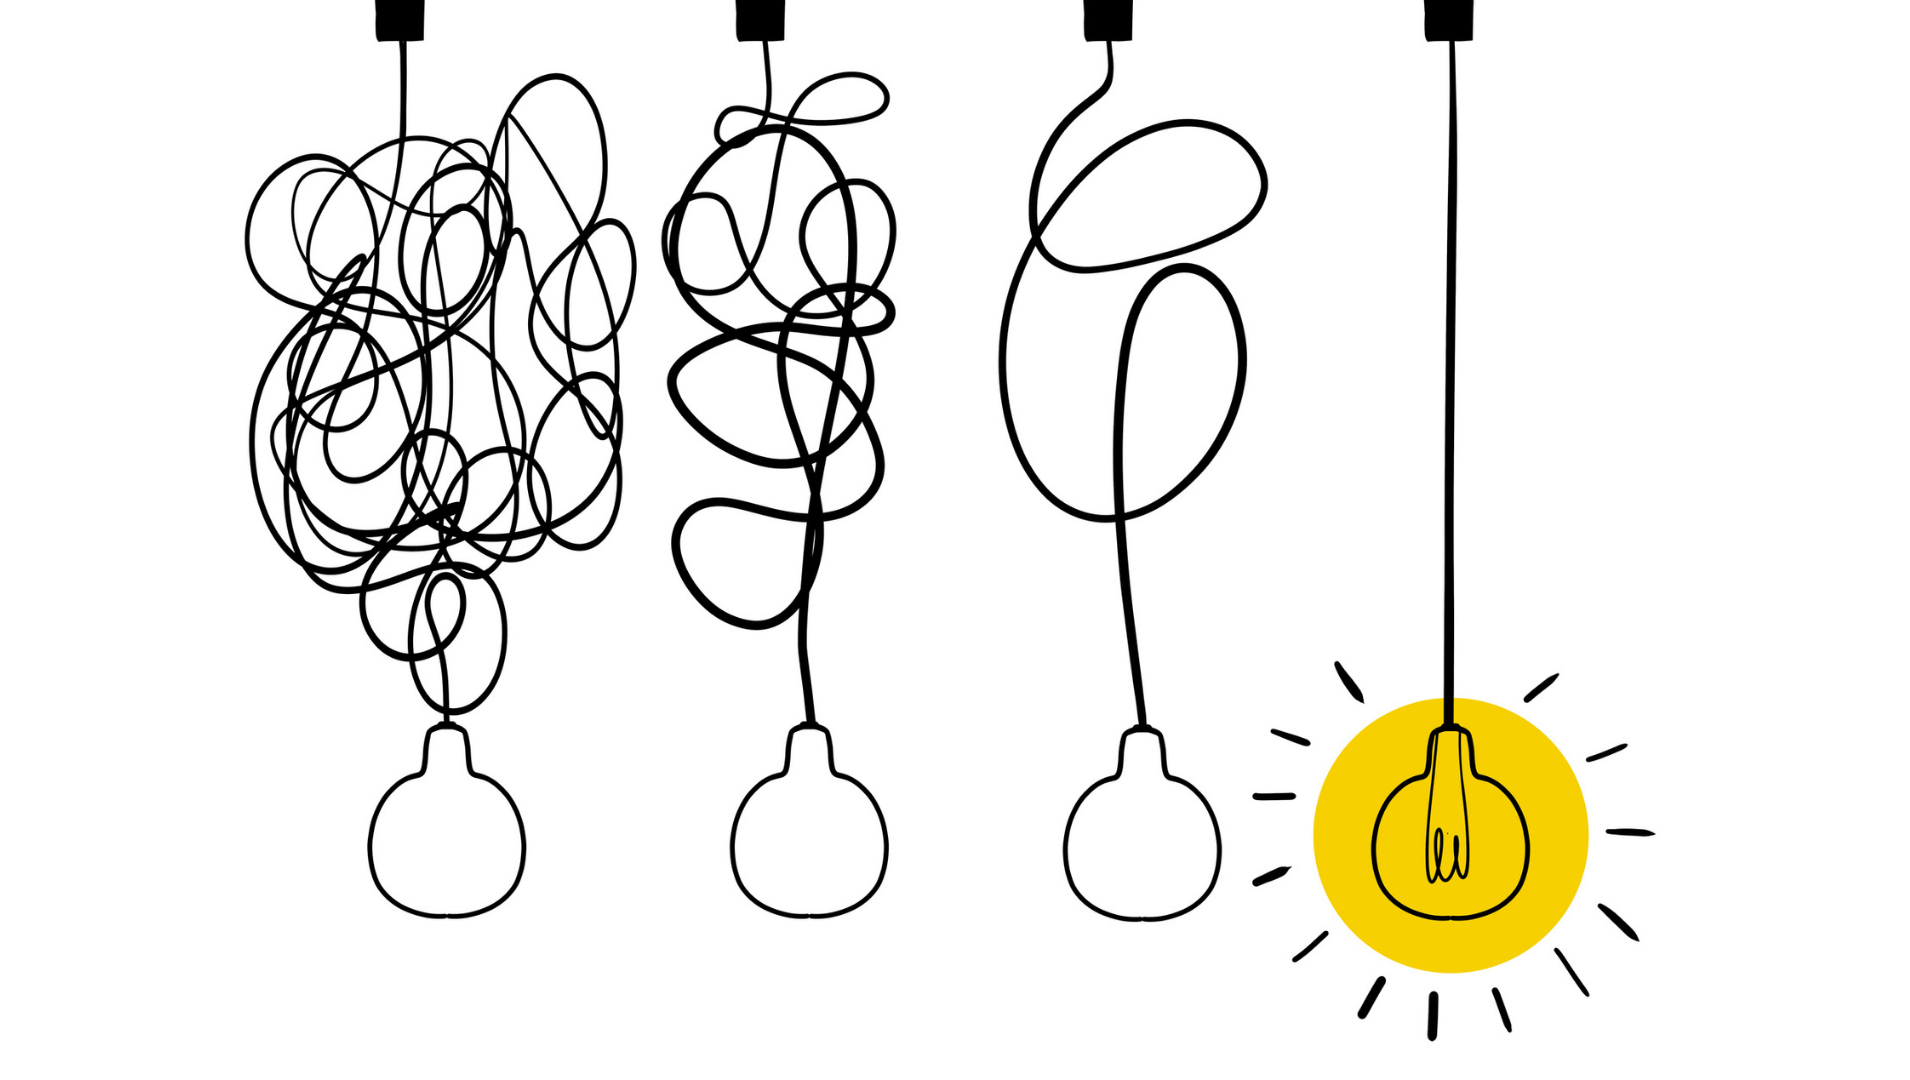 A line drawing of four light bulbs on decreasingly tangled separate cords.